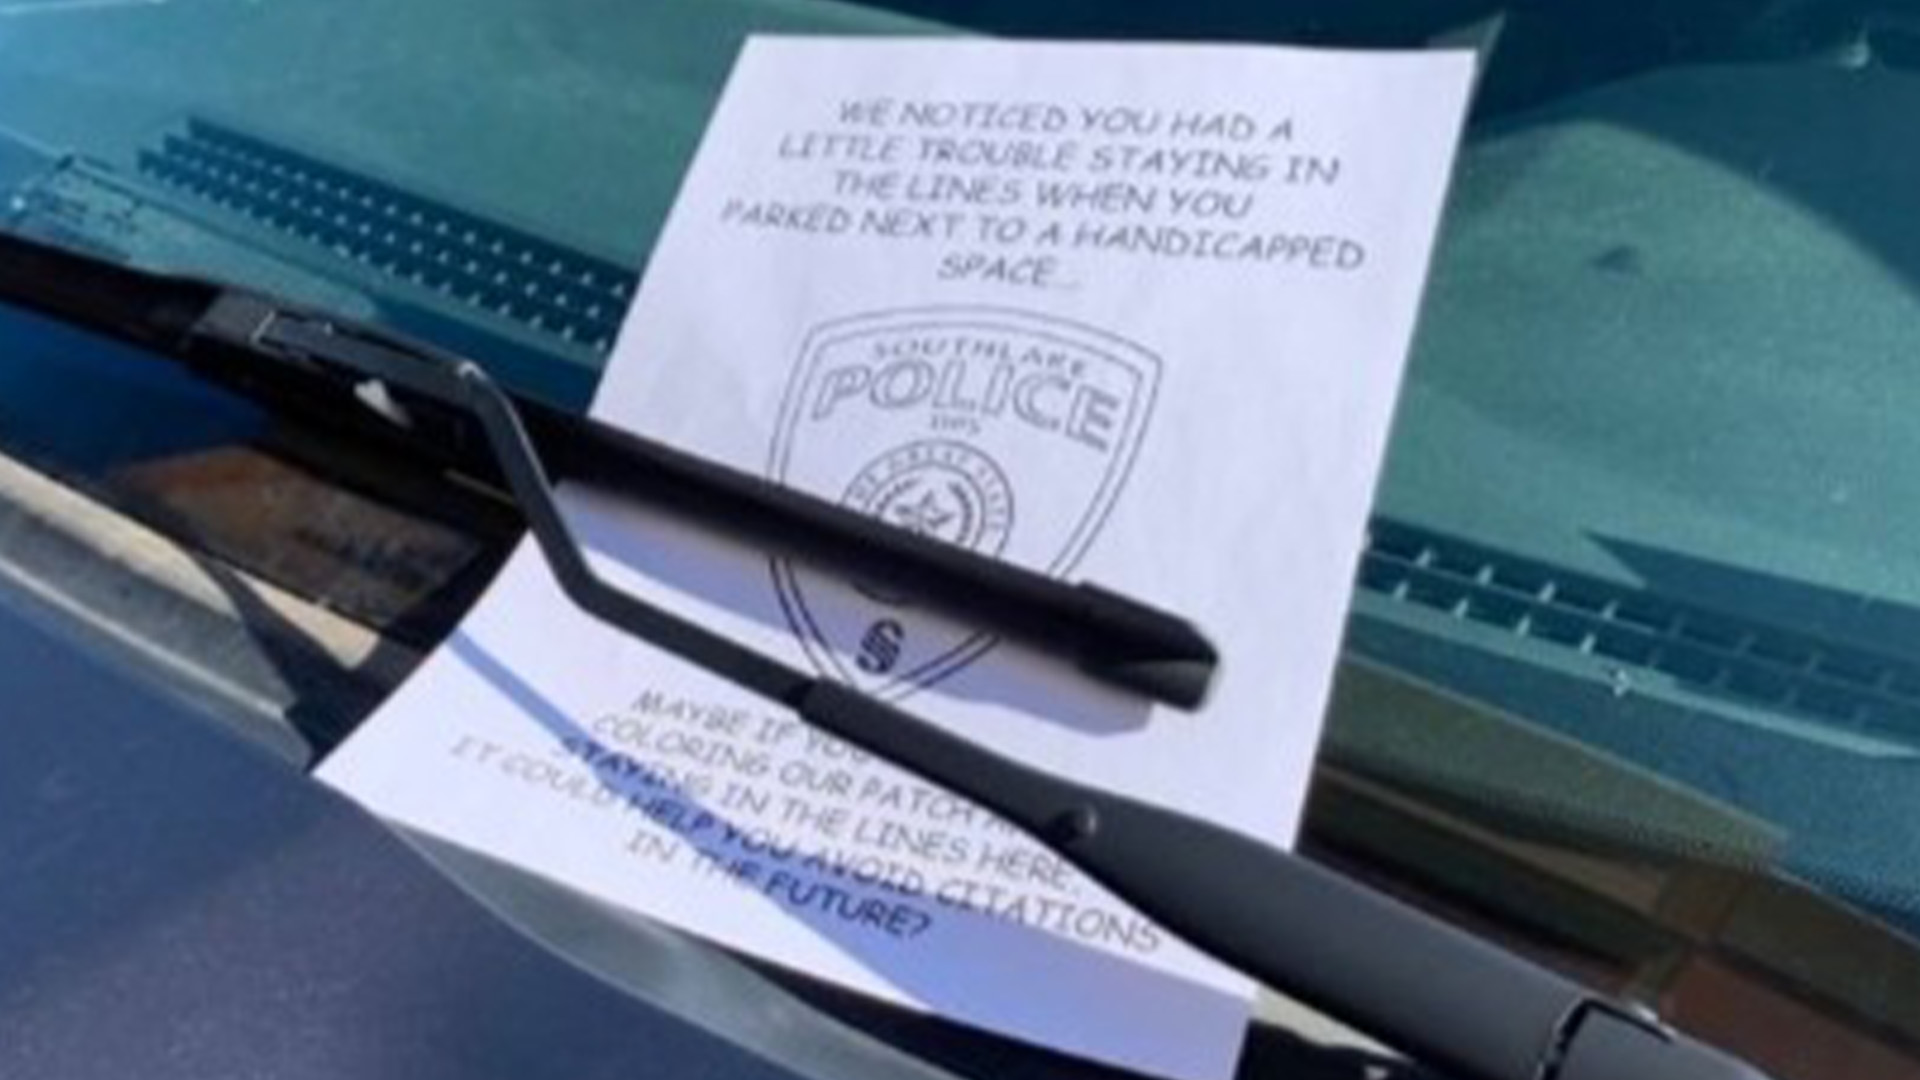 Careless driver punished with ‘snark and sass’ after shoddy parking job – cops left them a present that mocked them [Video]